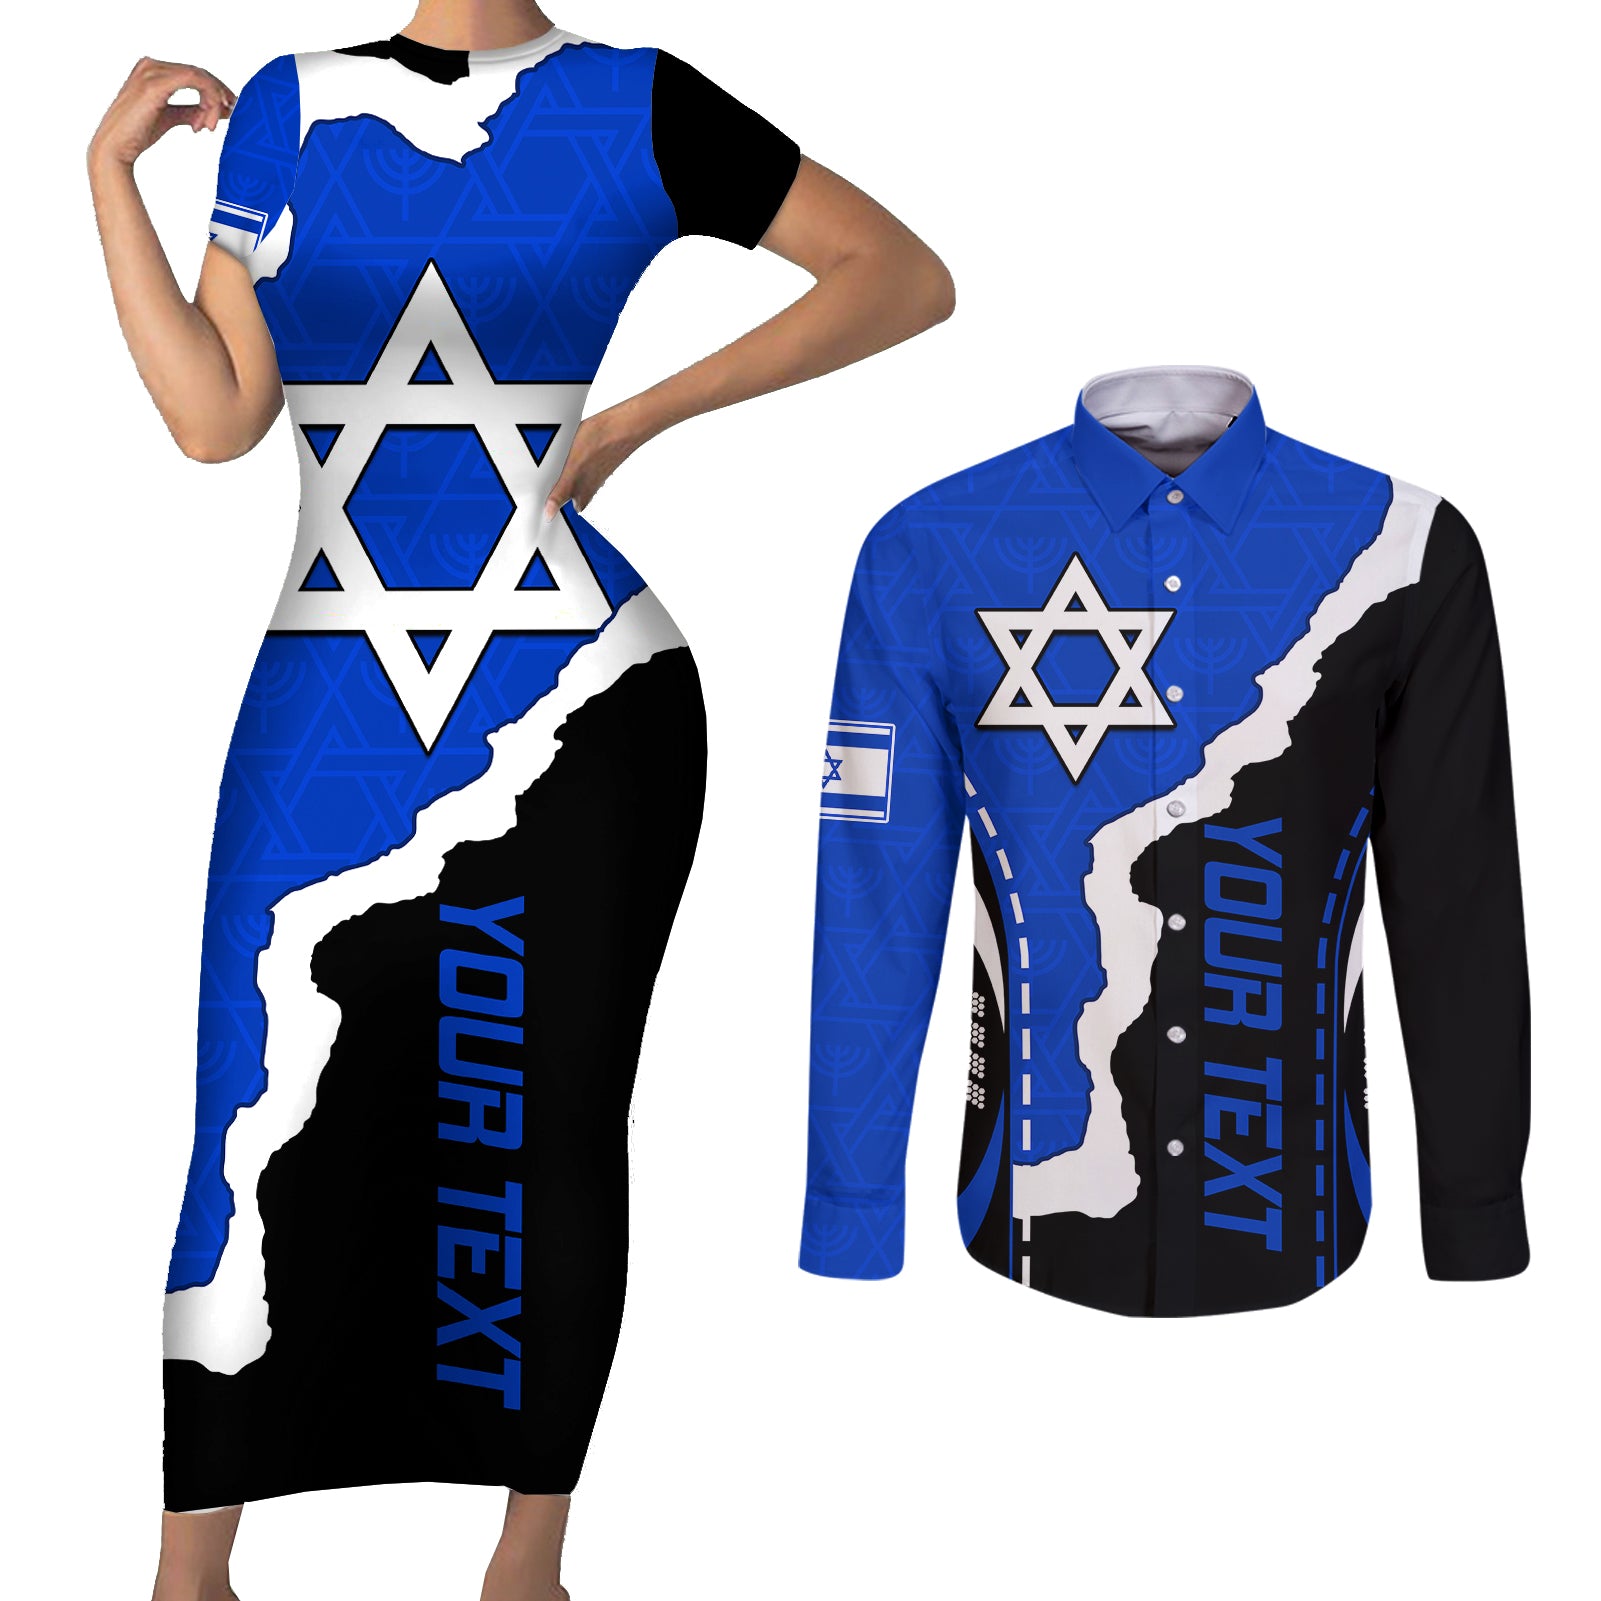 custom-israel-couples-matching-short-sleeve-bodycon-dress-and-long-sleeve-button-shirts-stars-of-david-sporty-style